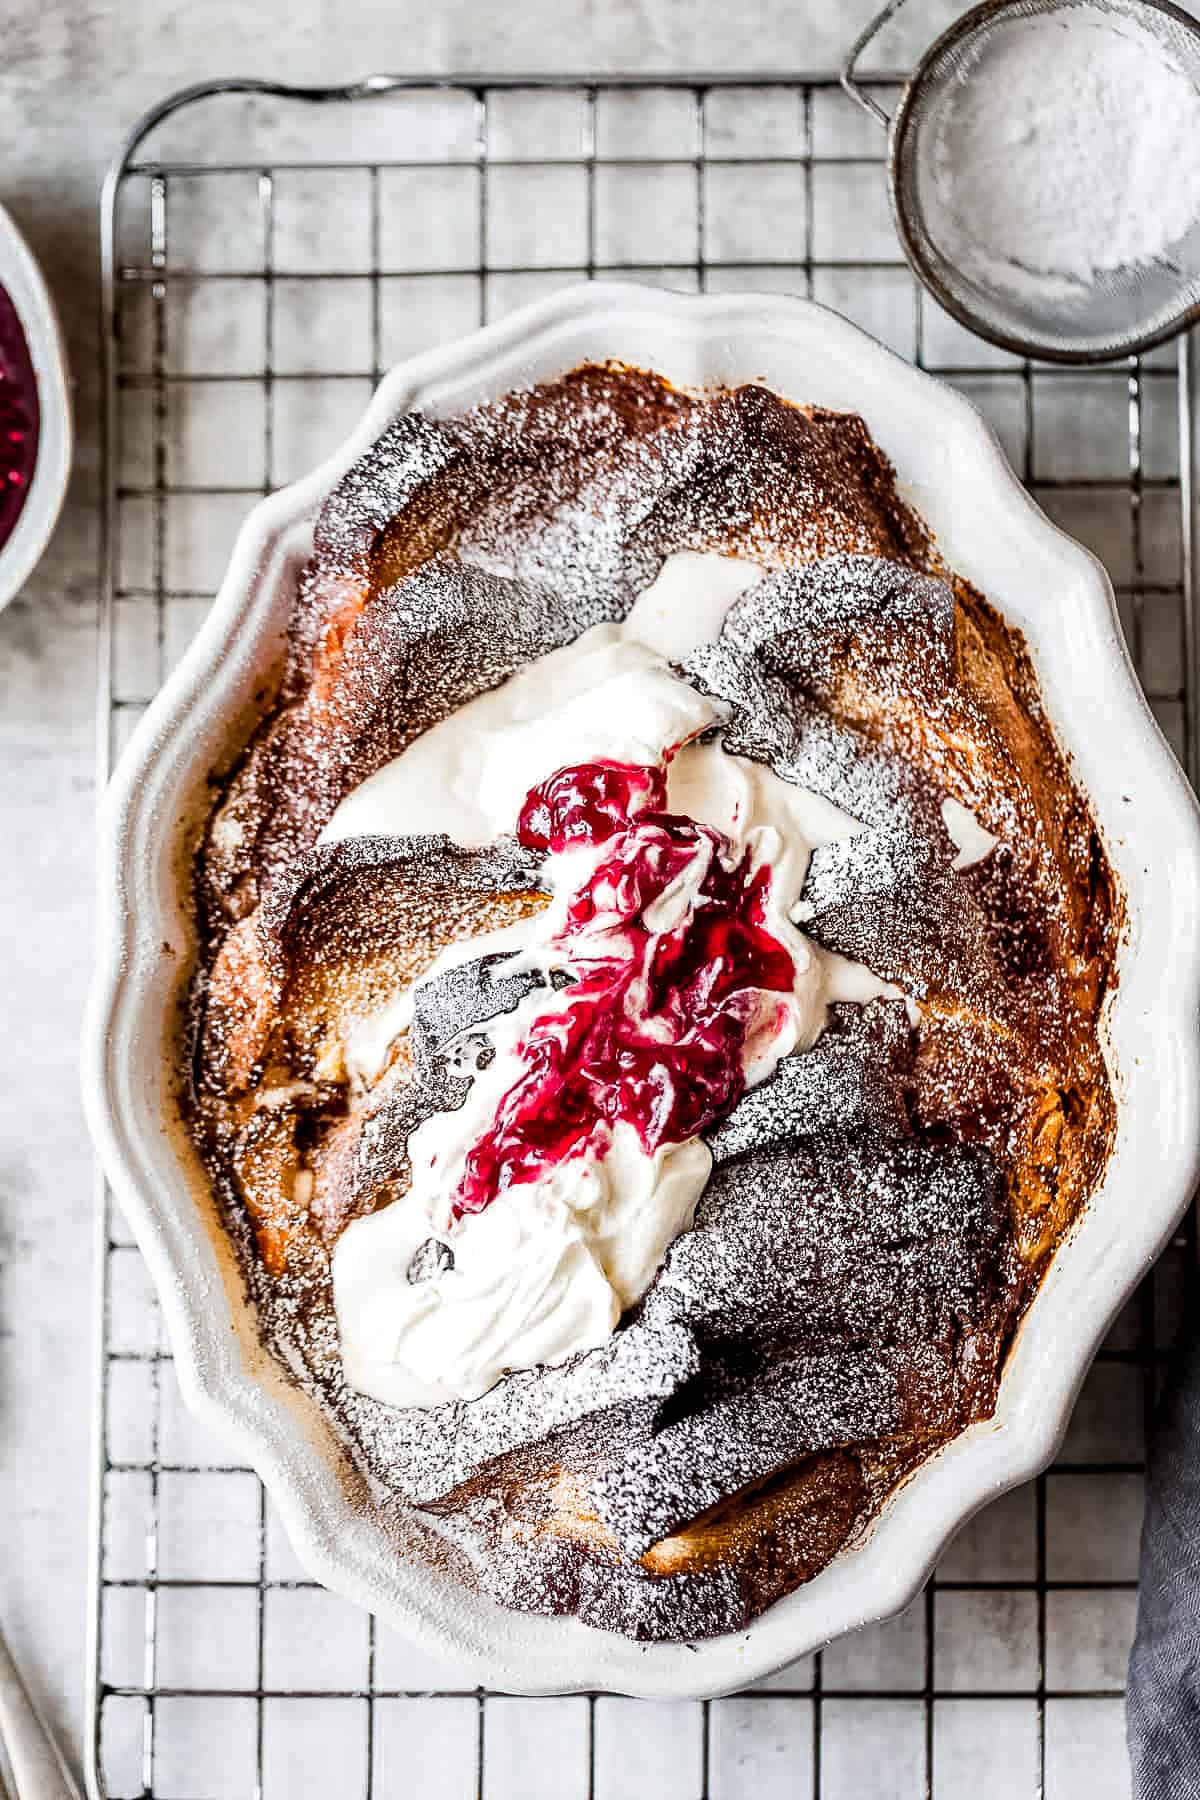 French toast bake with cream and raspberry preserves in a baking dish.